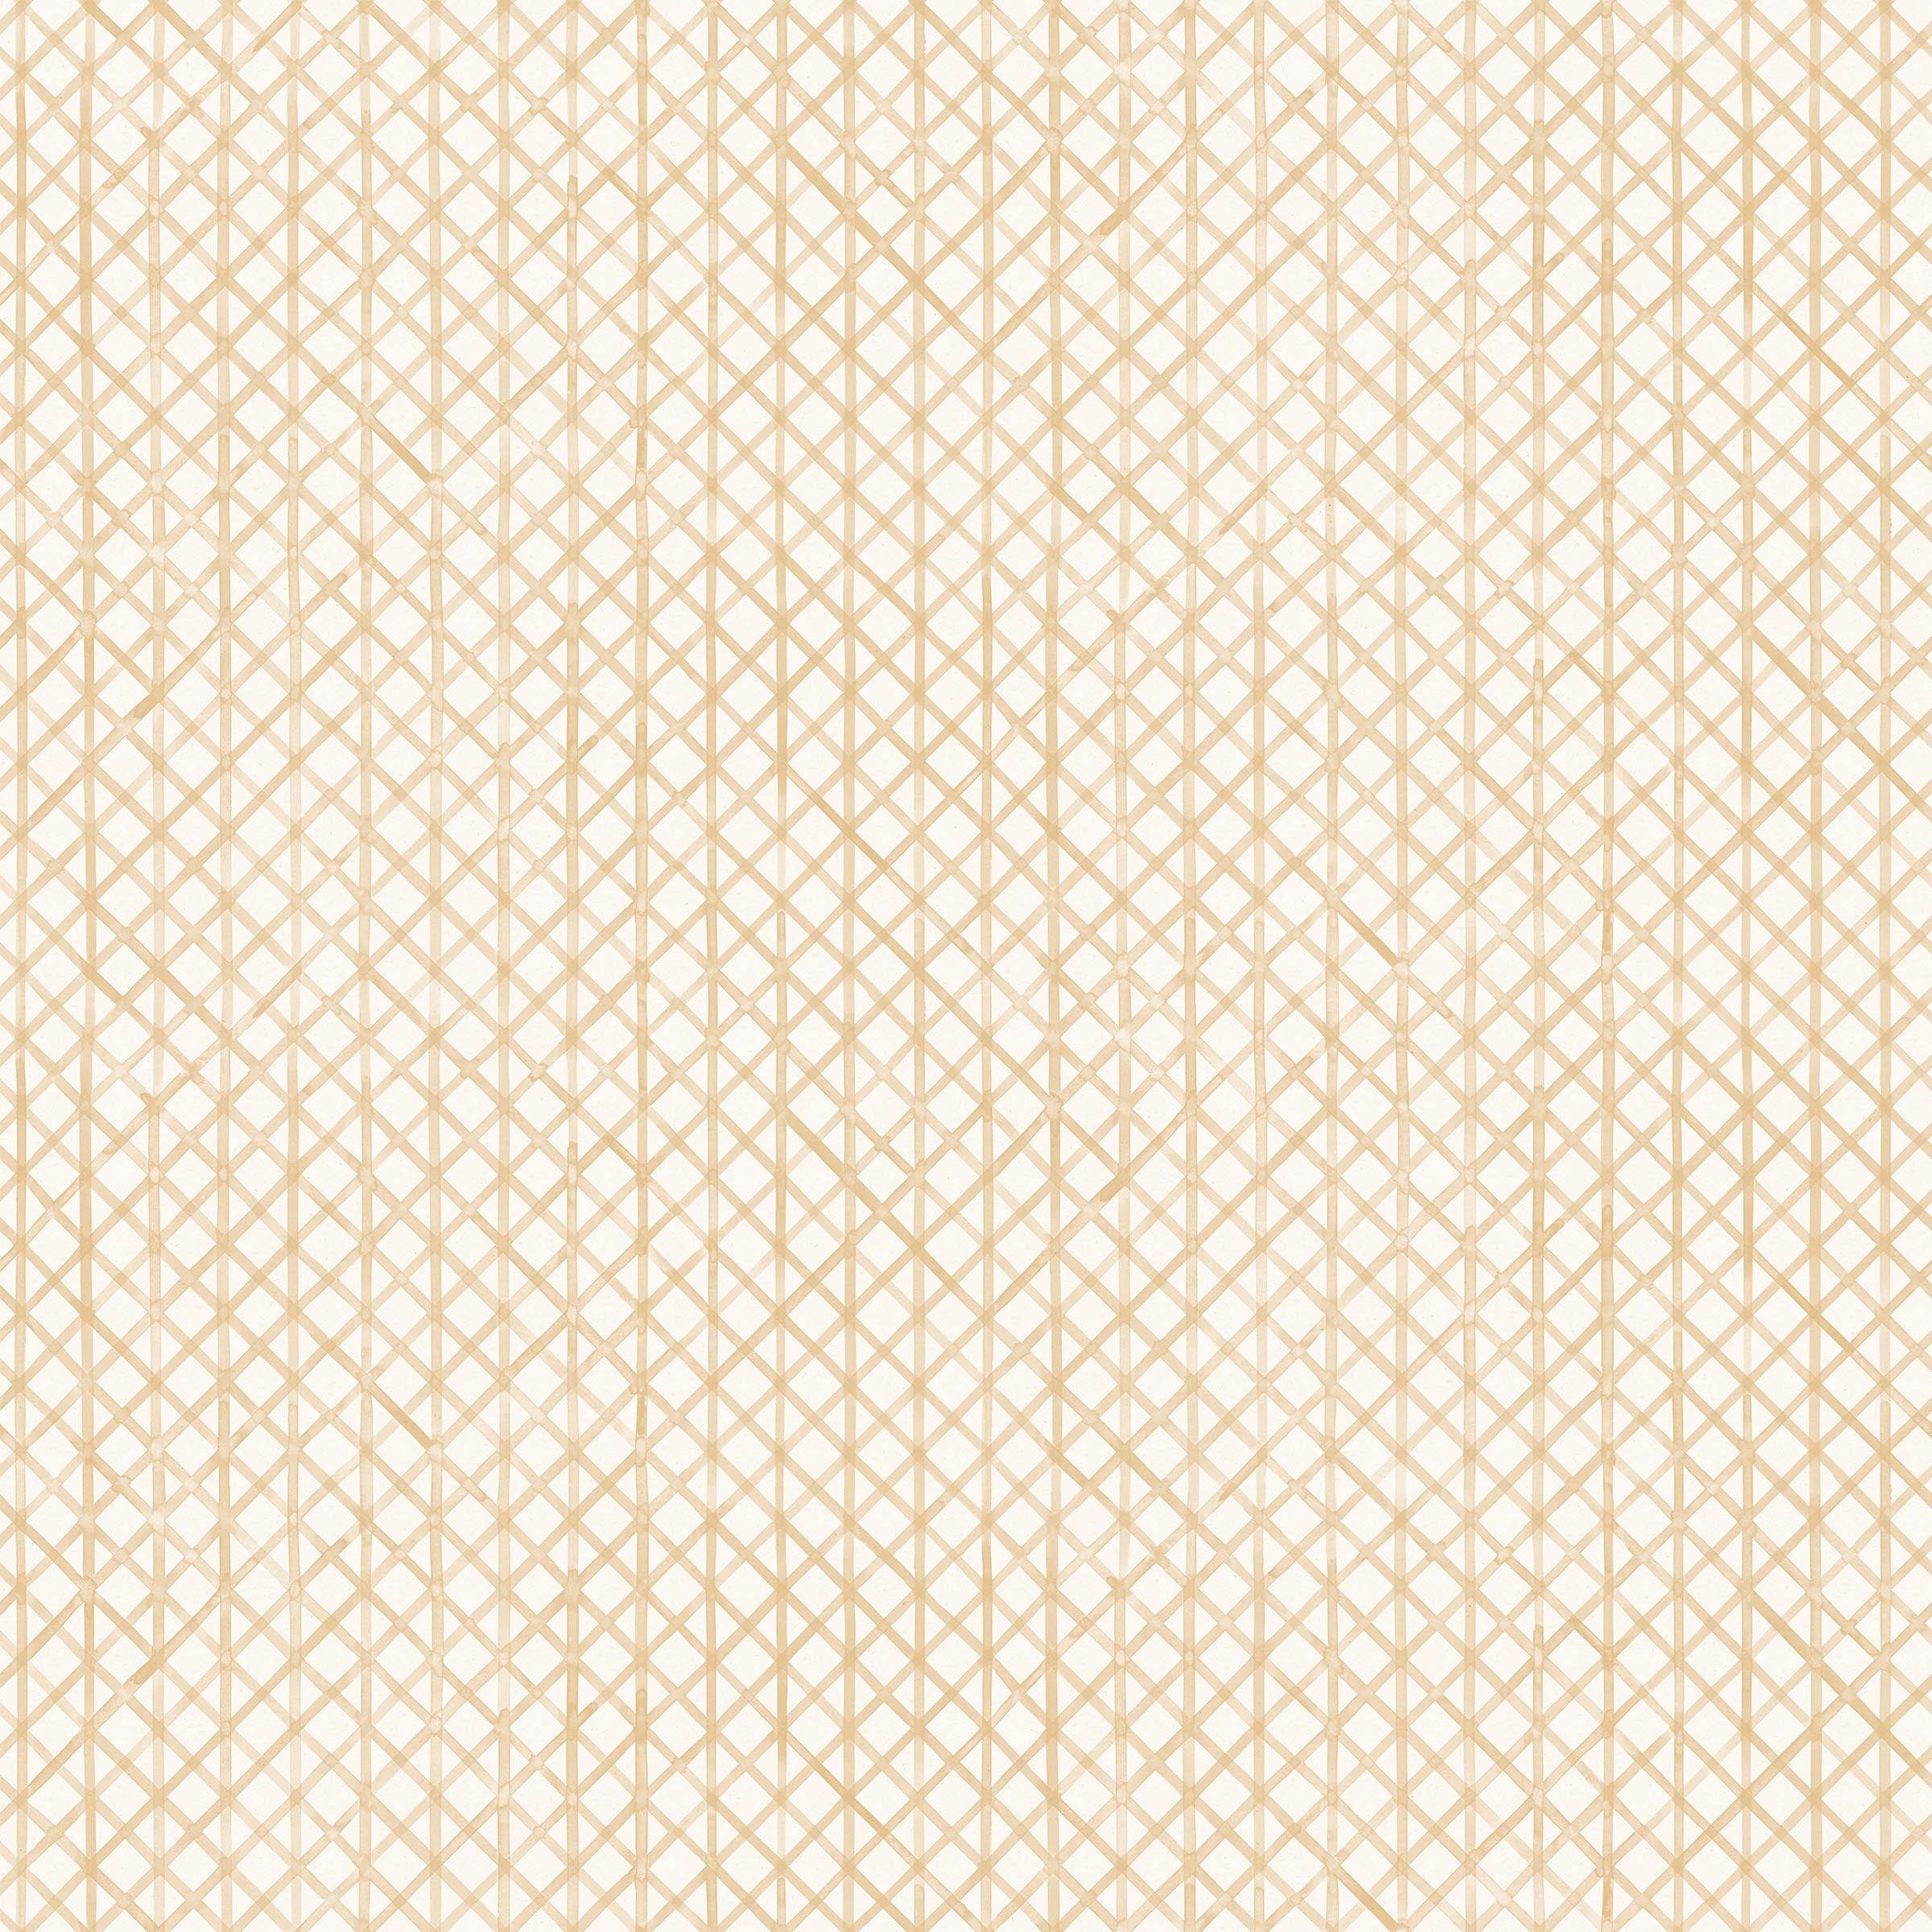 Detail of wallpaper in an intricate striped grid pattern in gold on a white field.